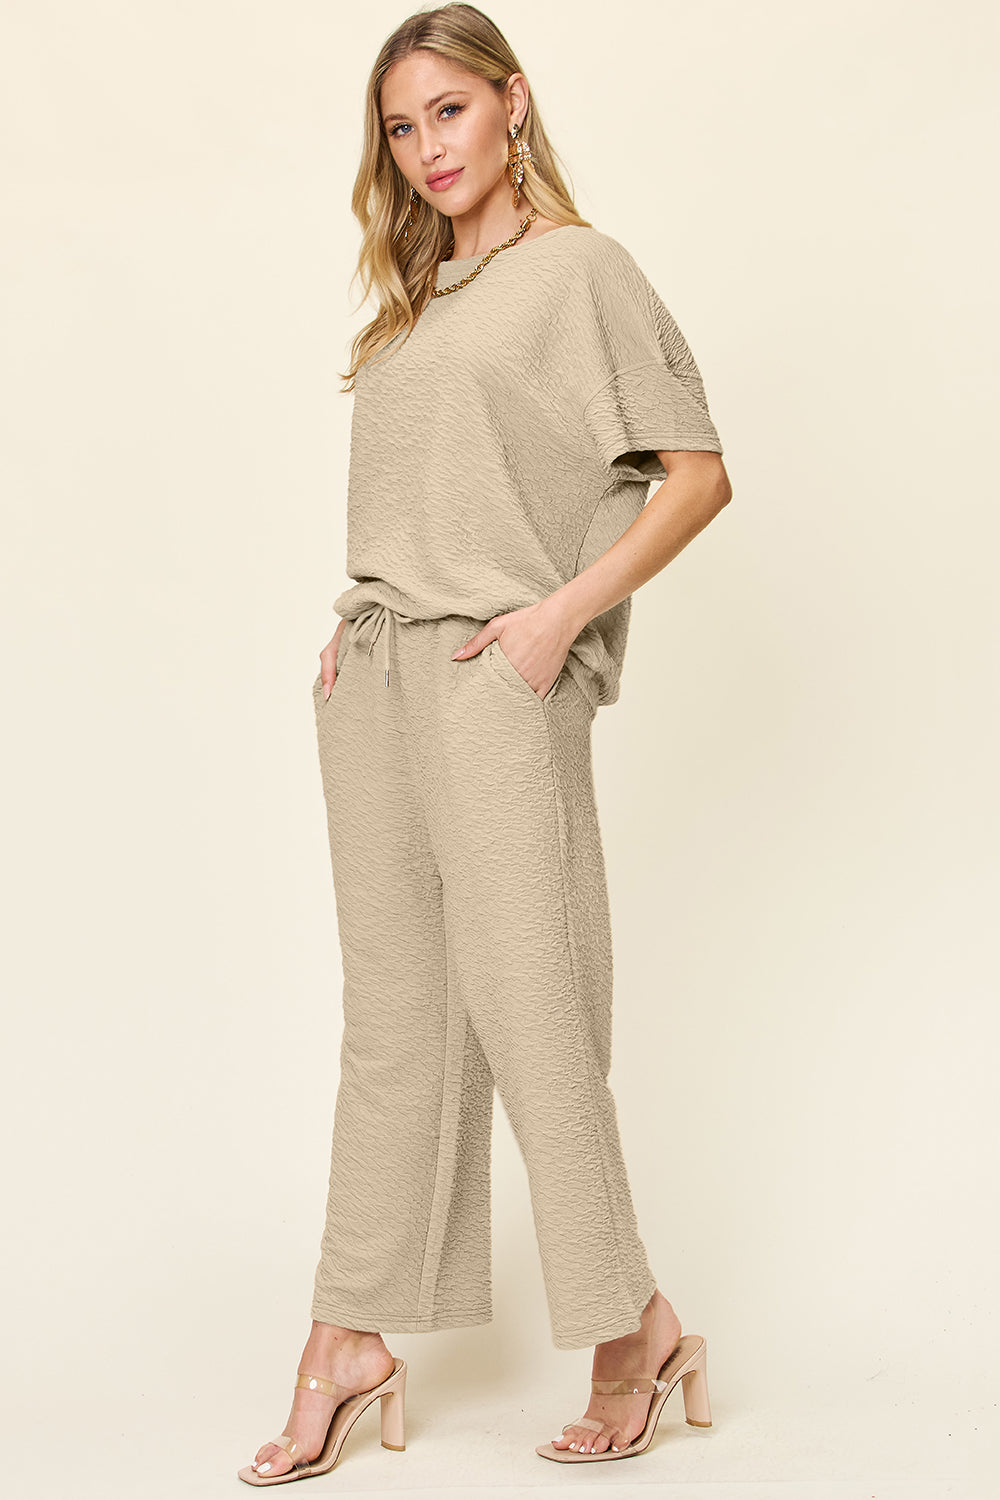 Double Take Texture Short Sleeve Top and Pants Set